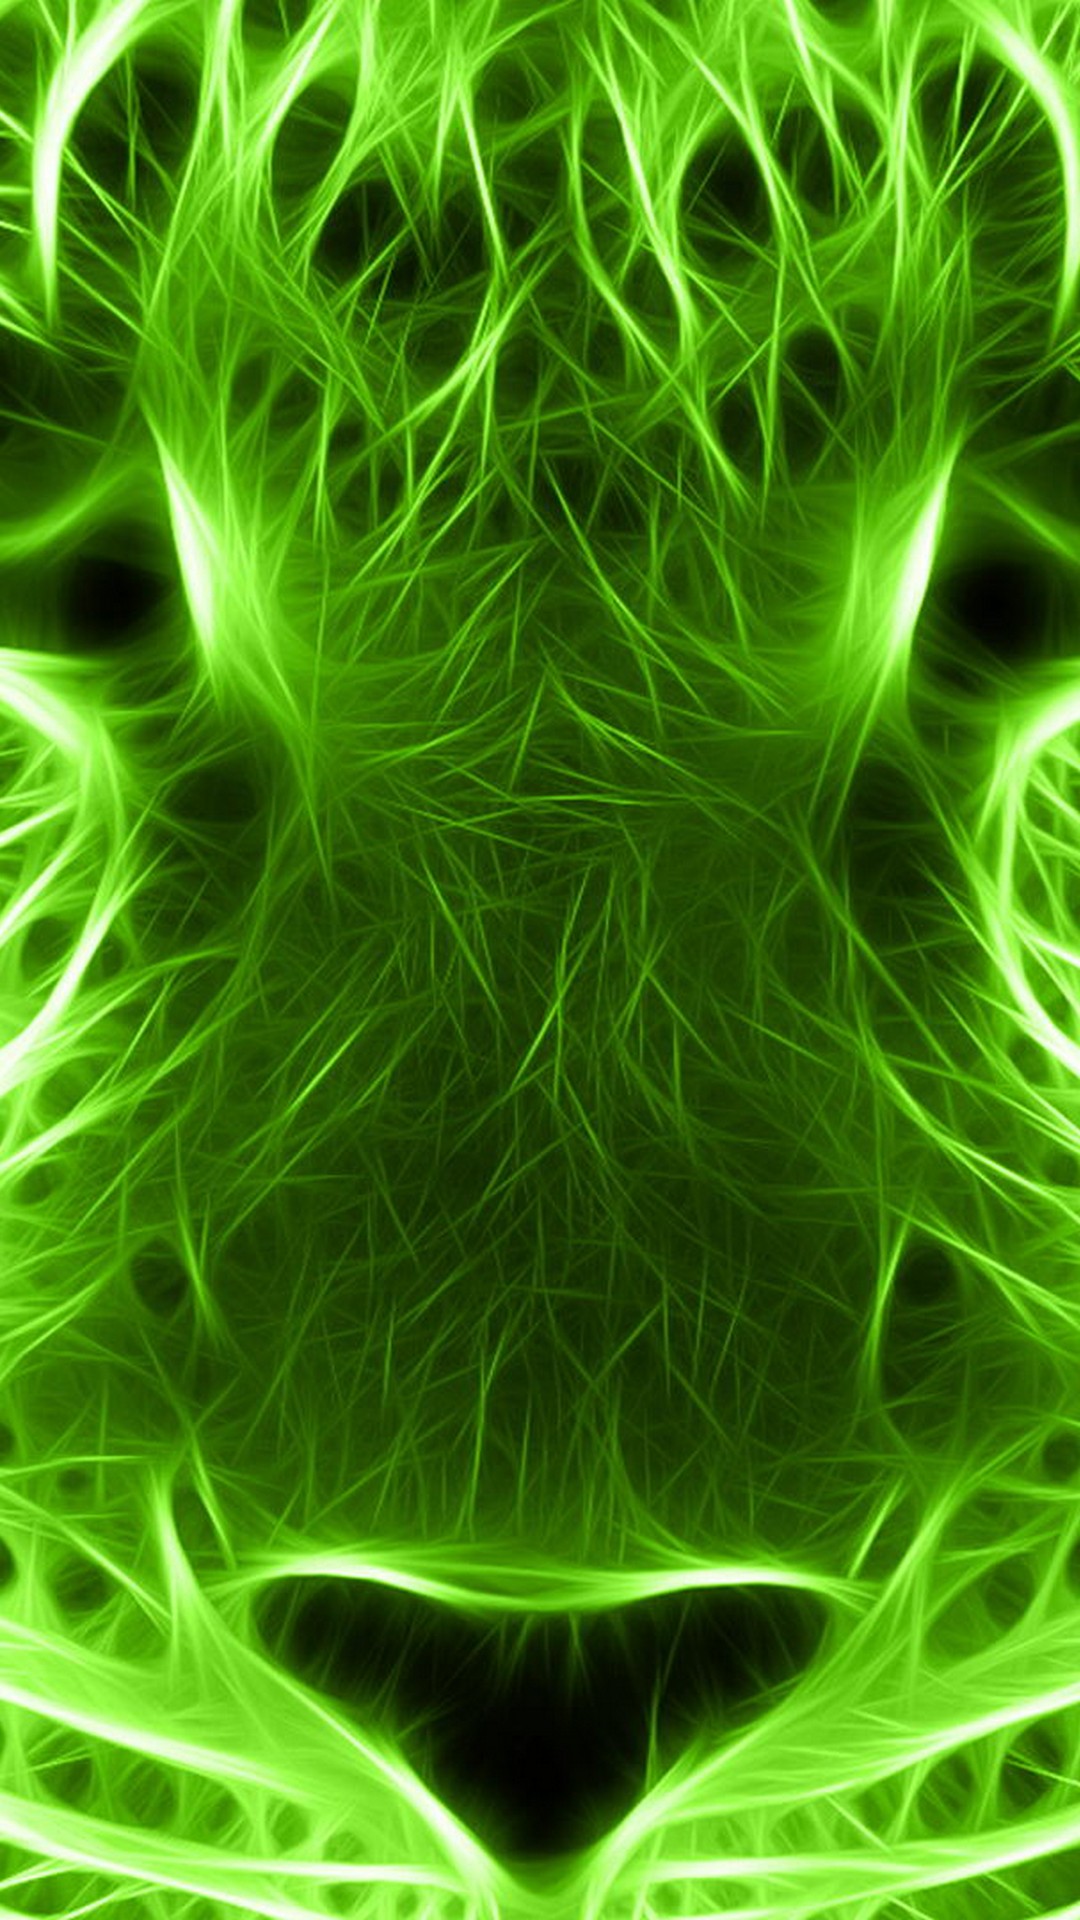 Mobile Wallpapers Neon Green with image resolution 1080x1920 pixel. You can make this wallpaper for your iPhone 5, 6, 7, 8, X backgrounds, Mobile Screensaver, or iPad Lock Screen